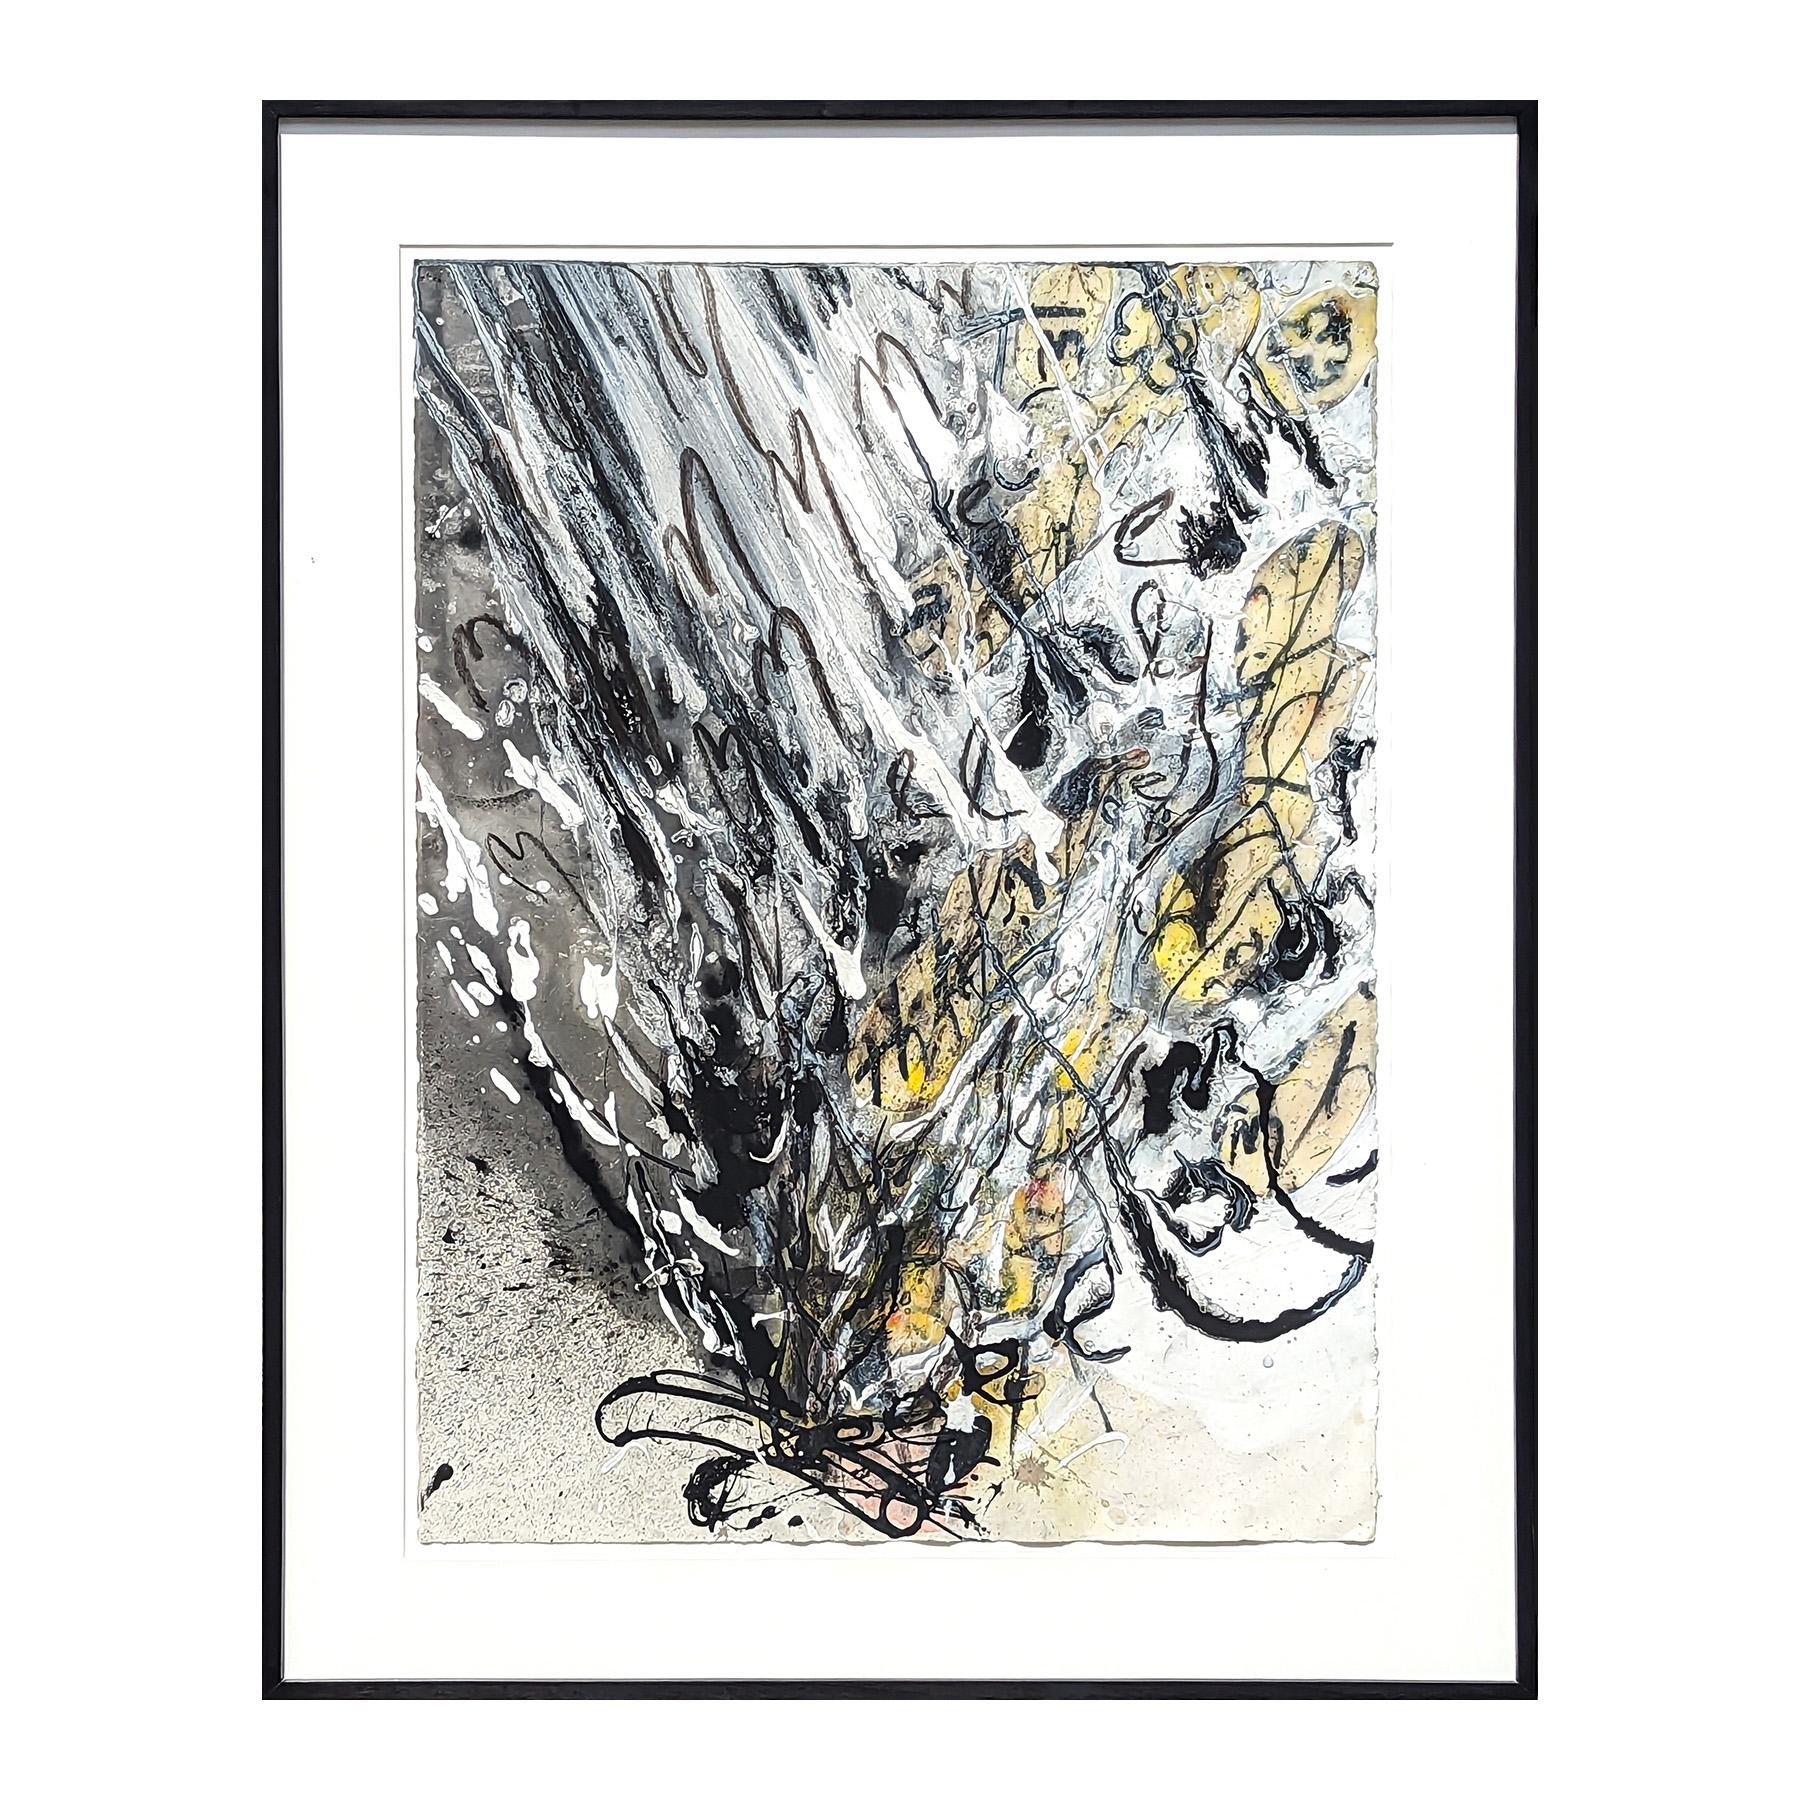 Contemporary abstract expressionist mixed media painting by Florida-born artist Suzanne McClelland. The work features an explosion of abstract and energetic mark making stemming from the lower central margin. The color palette of black, white, and